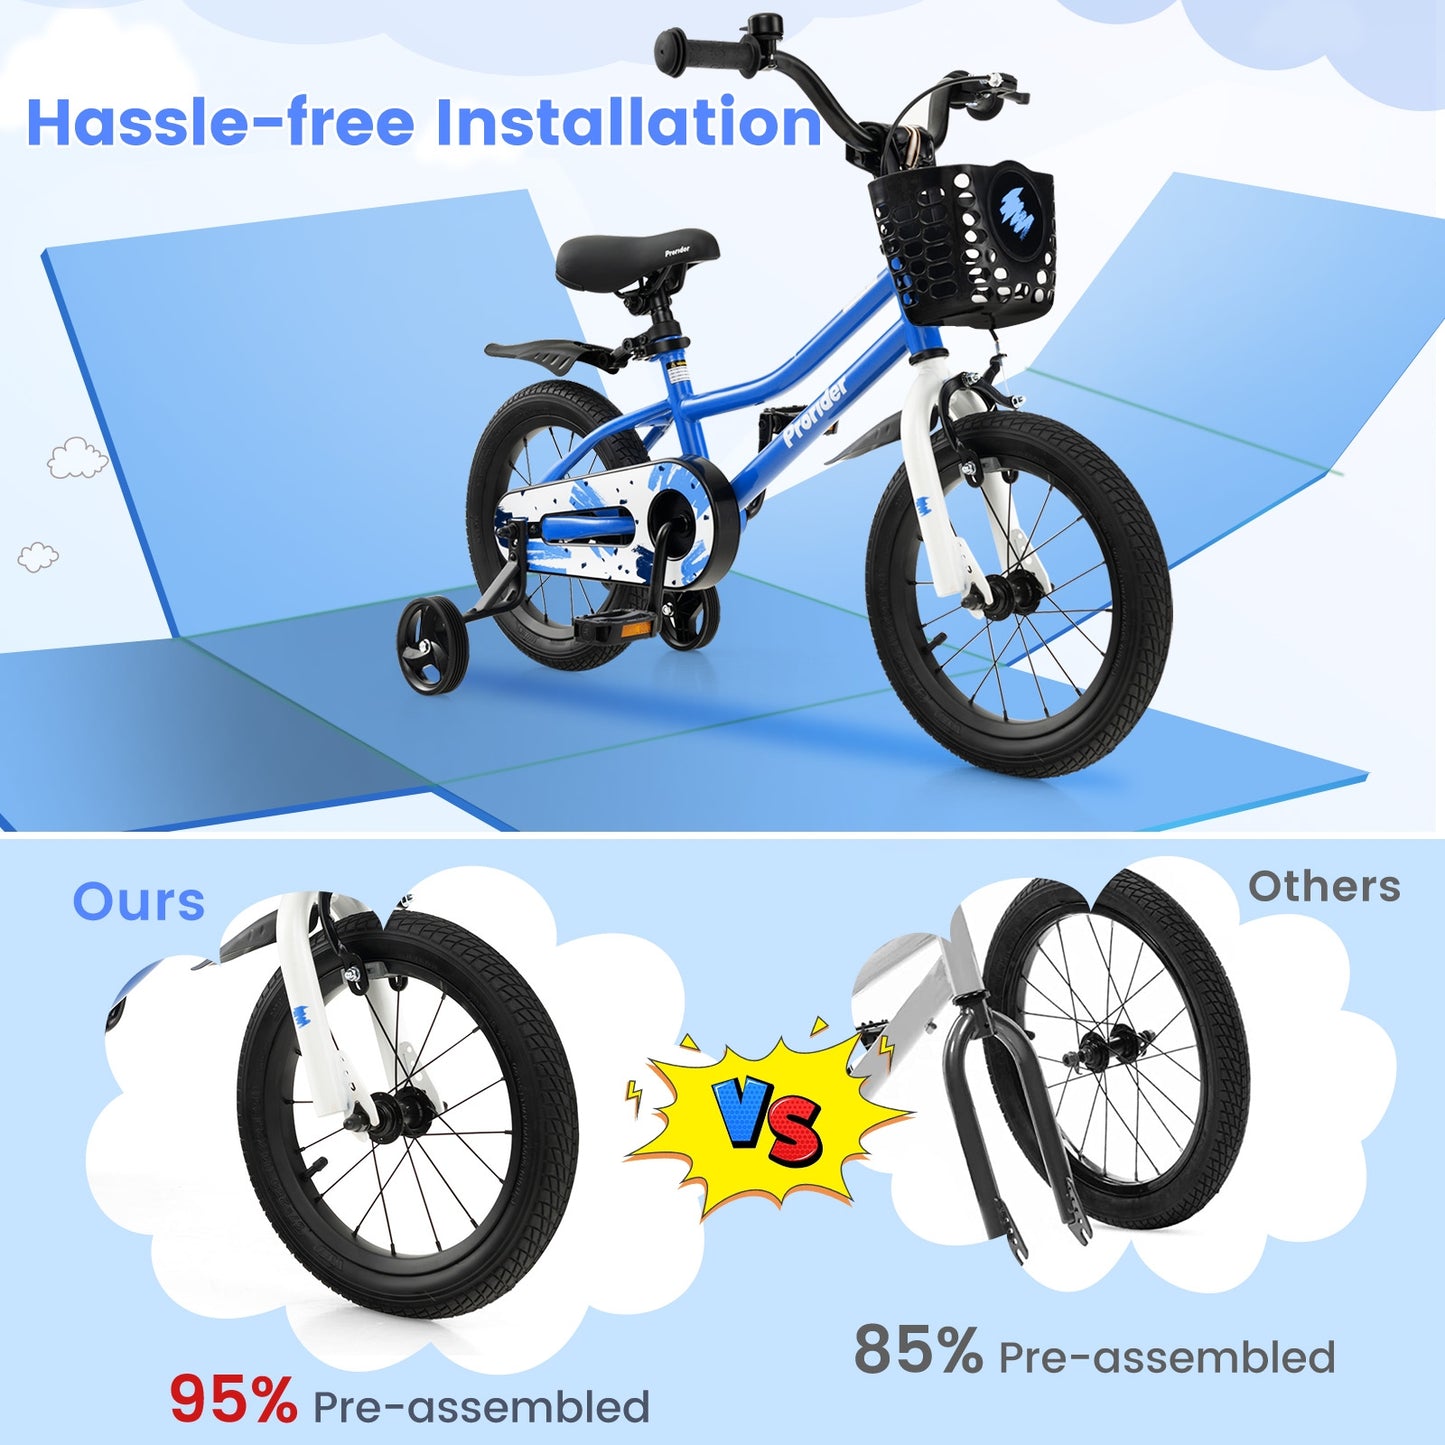 14 Inch Kids Bike with 2 Training Wheels for 3-5 Years Old-Blue